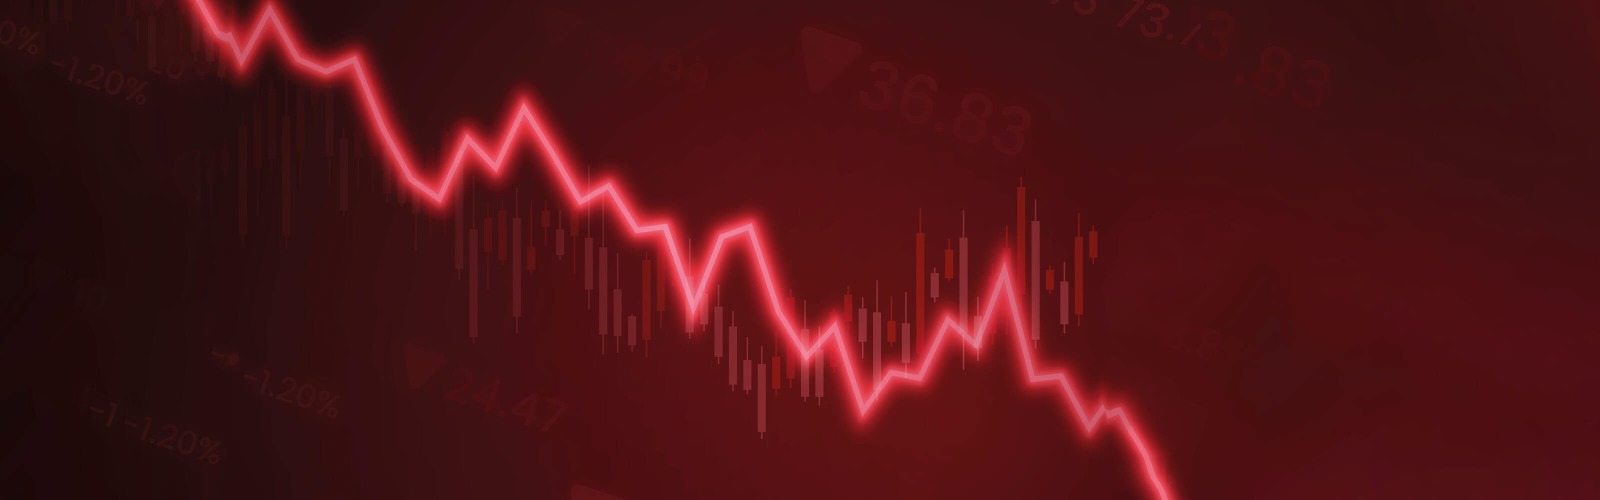 line graph red toned